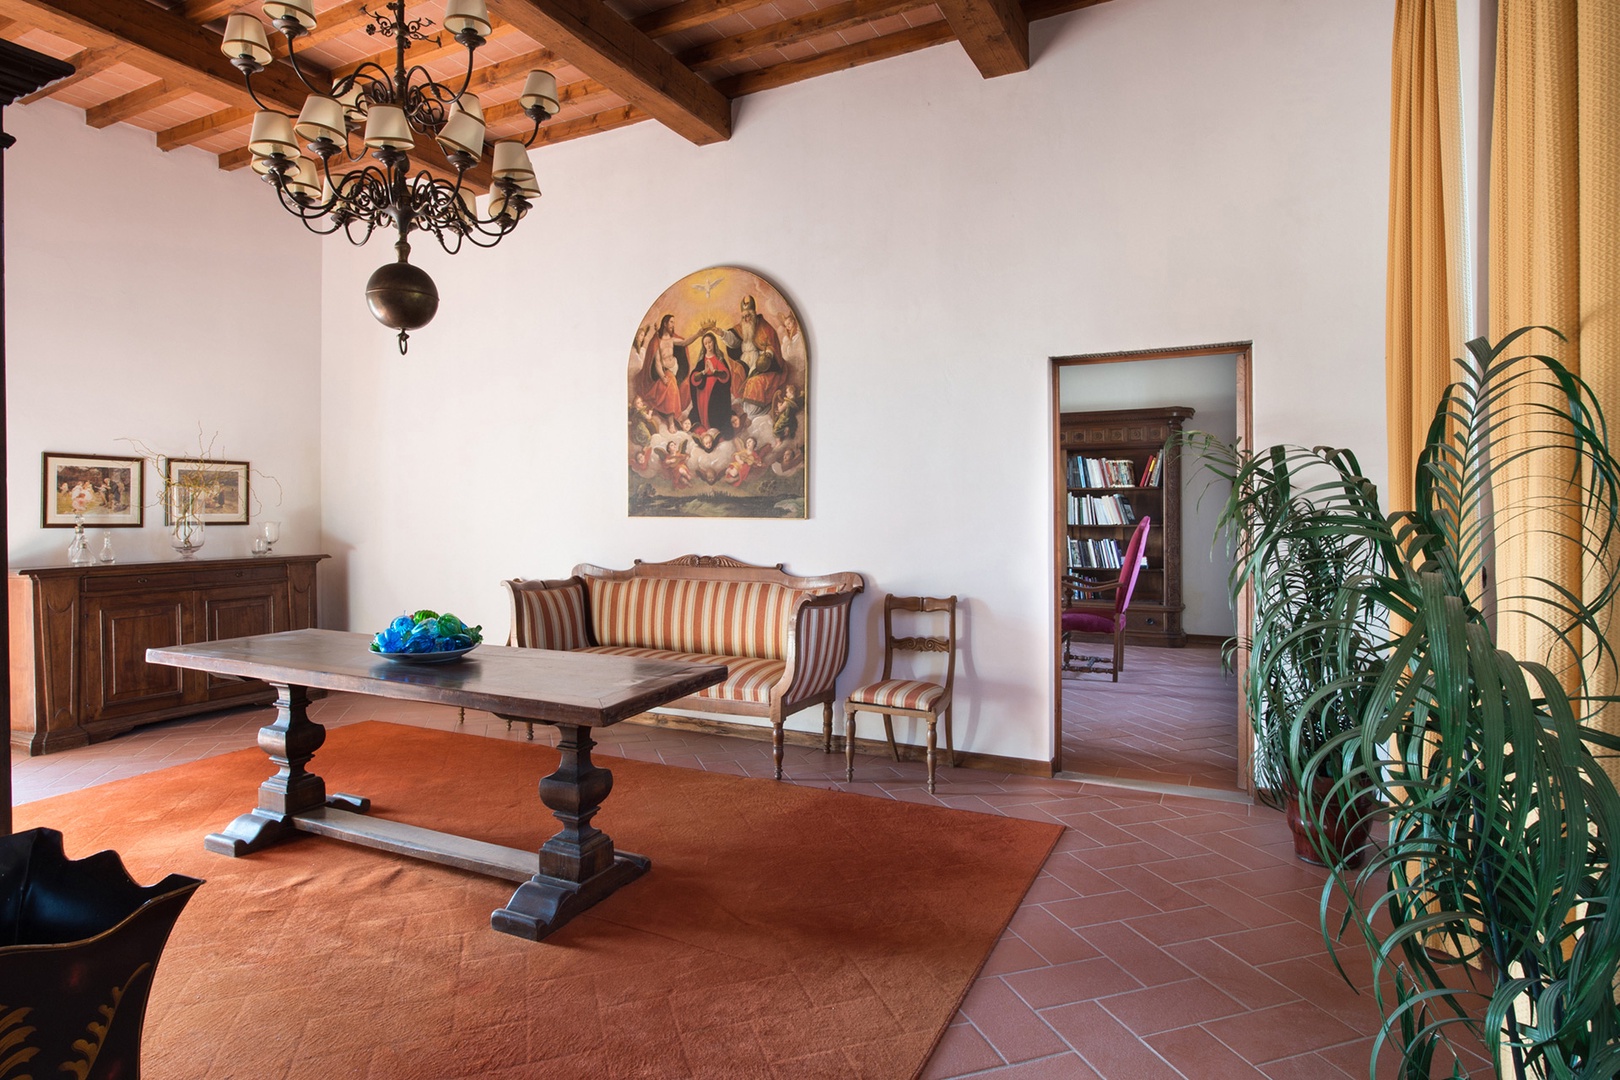 Spacious entry foyer hints at the roominess of this generously proportioned villa.